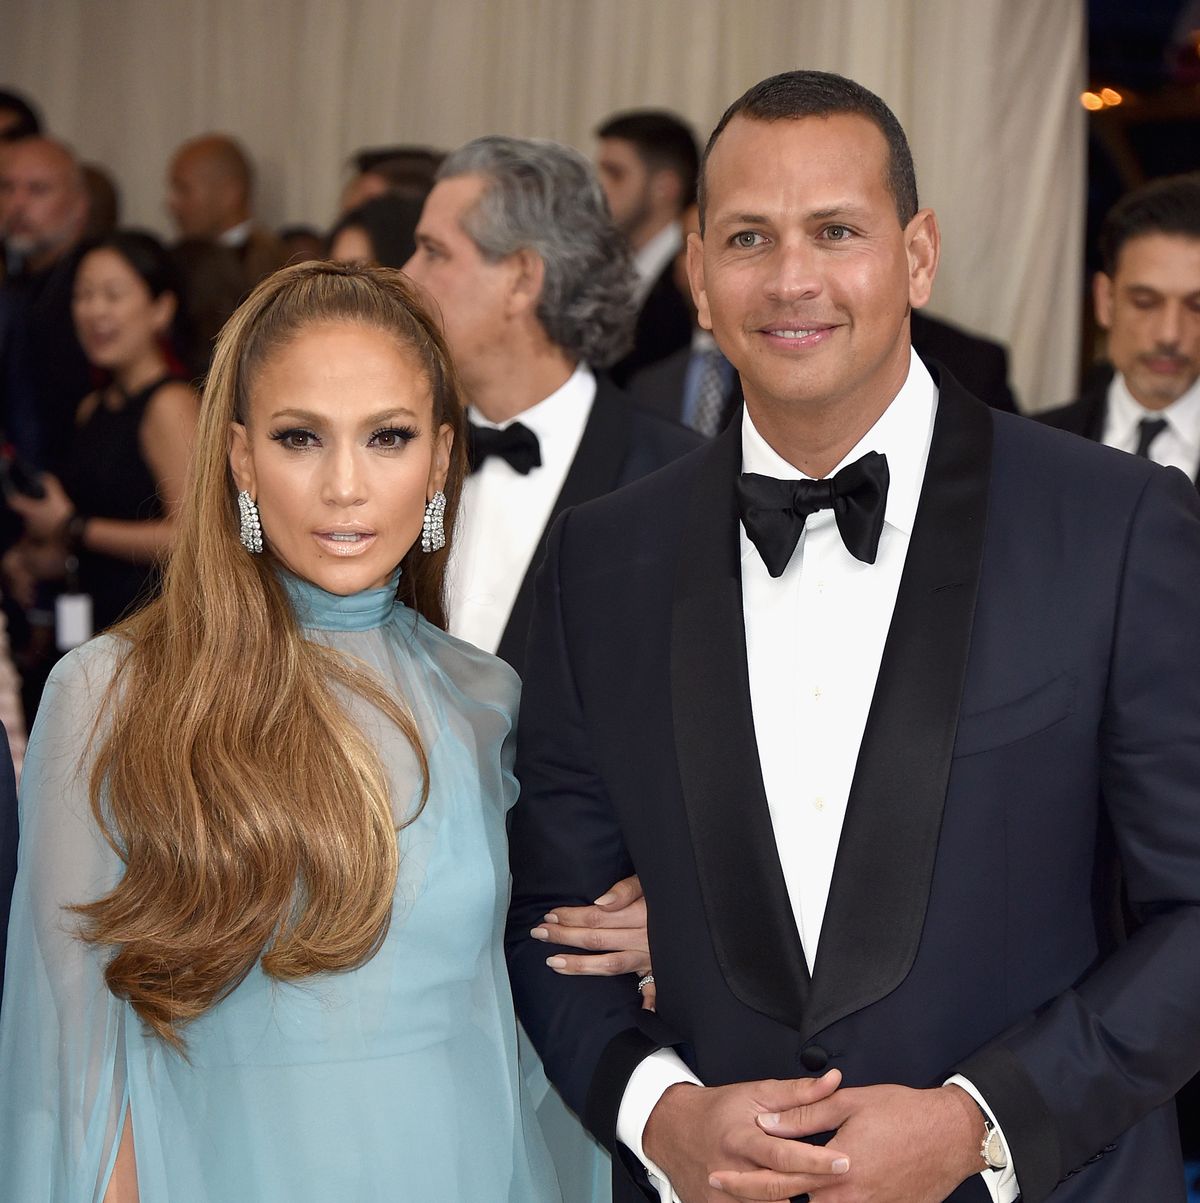 Video Alex Rodriguez talks about his relationship with Jennifer